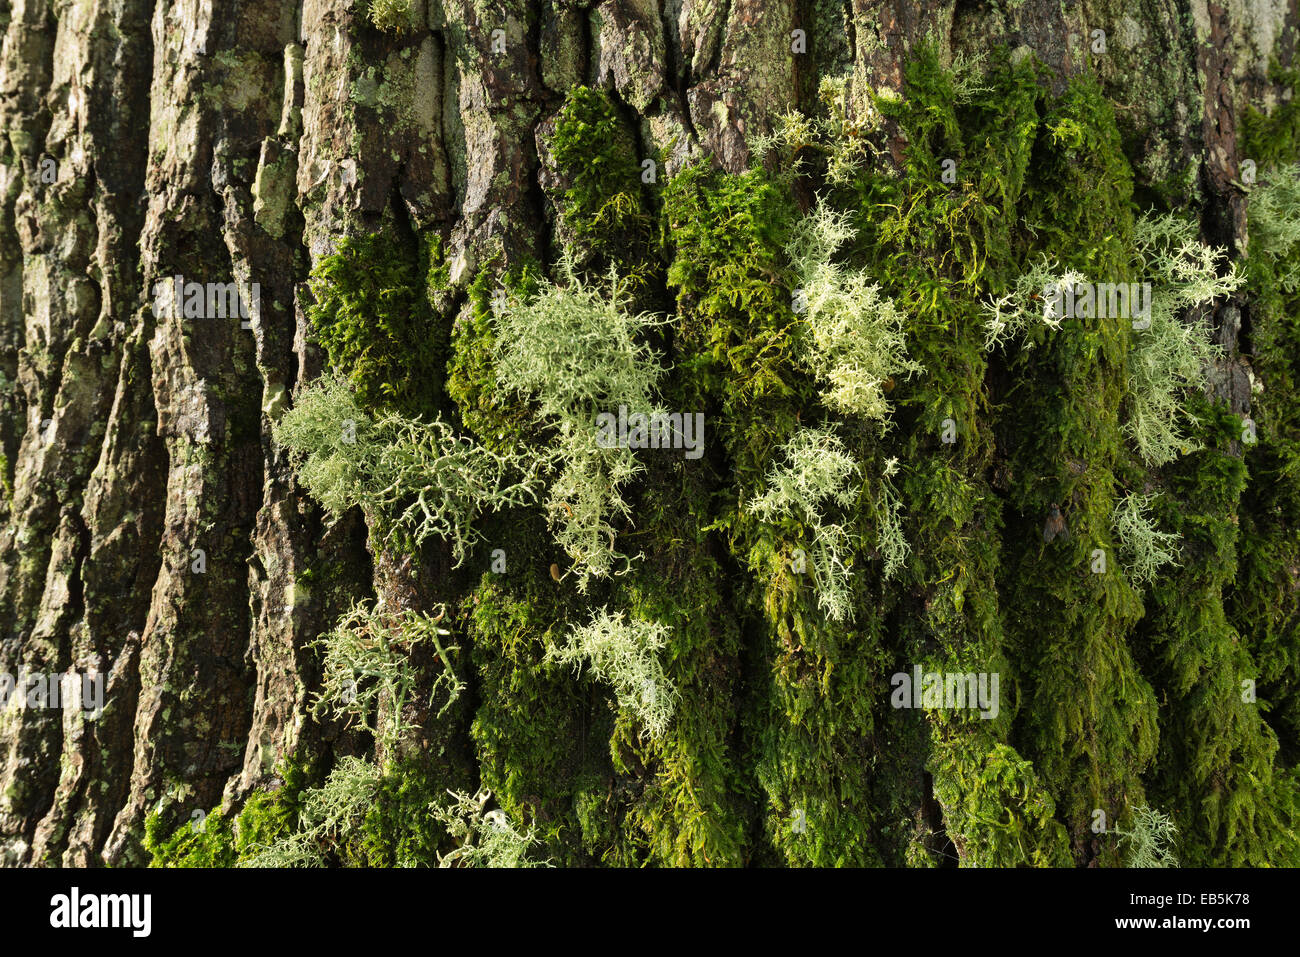 glancing light showing texture and form of moss and lichen on mature tree trunk of an old oak tree Stock Photo